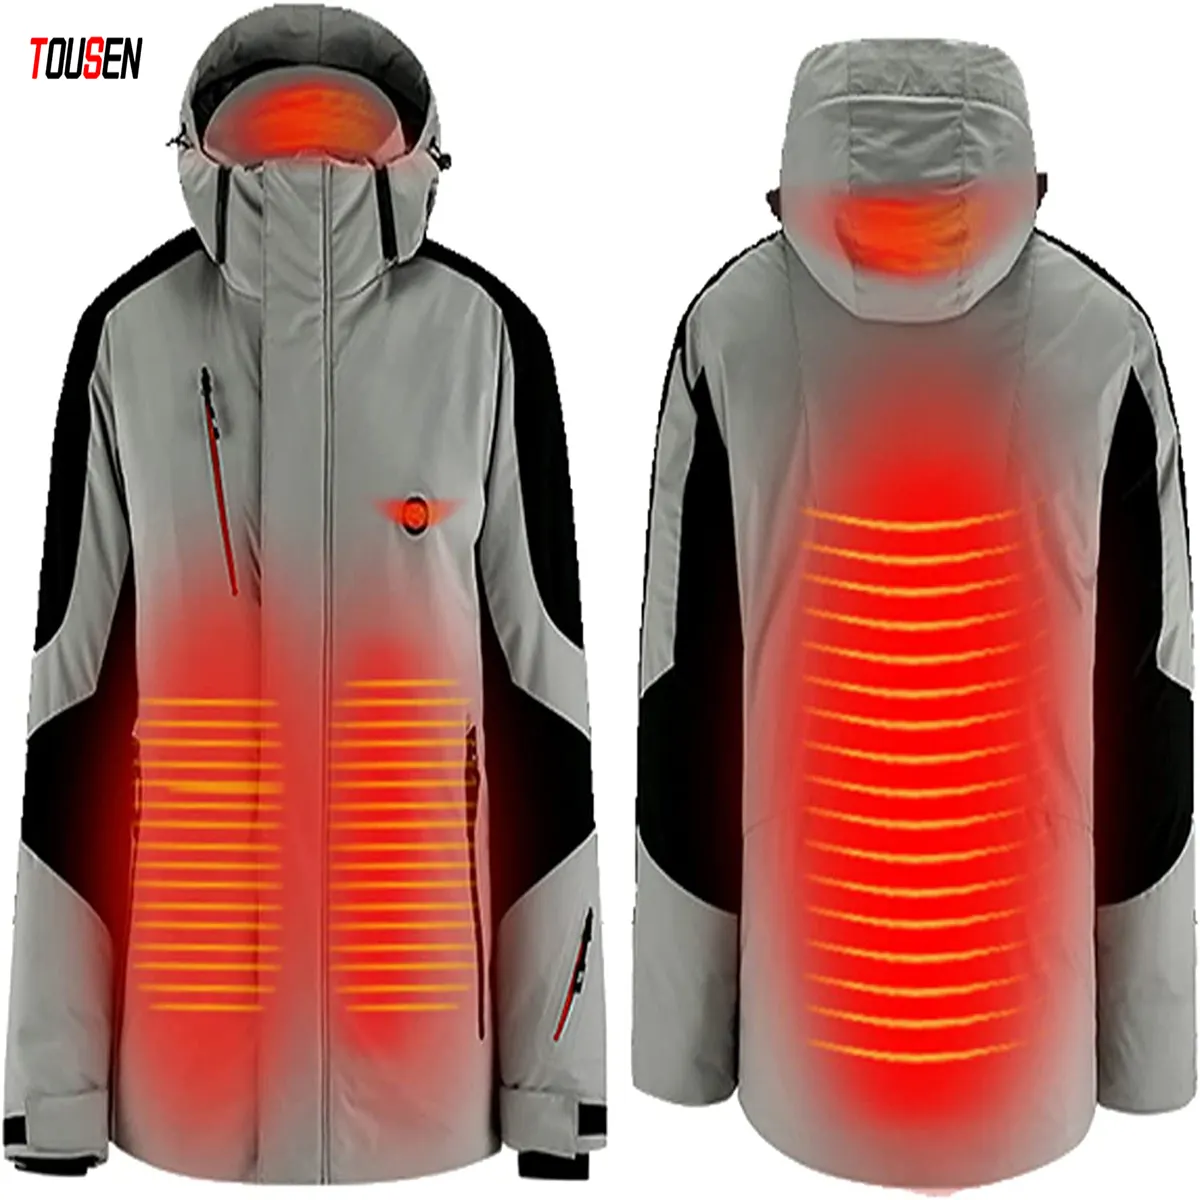 outdoor wear customized winter warming jacket skiing coat electrical heating coat heated outwear clothes USB smart garments